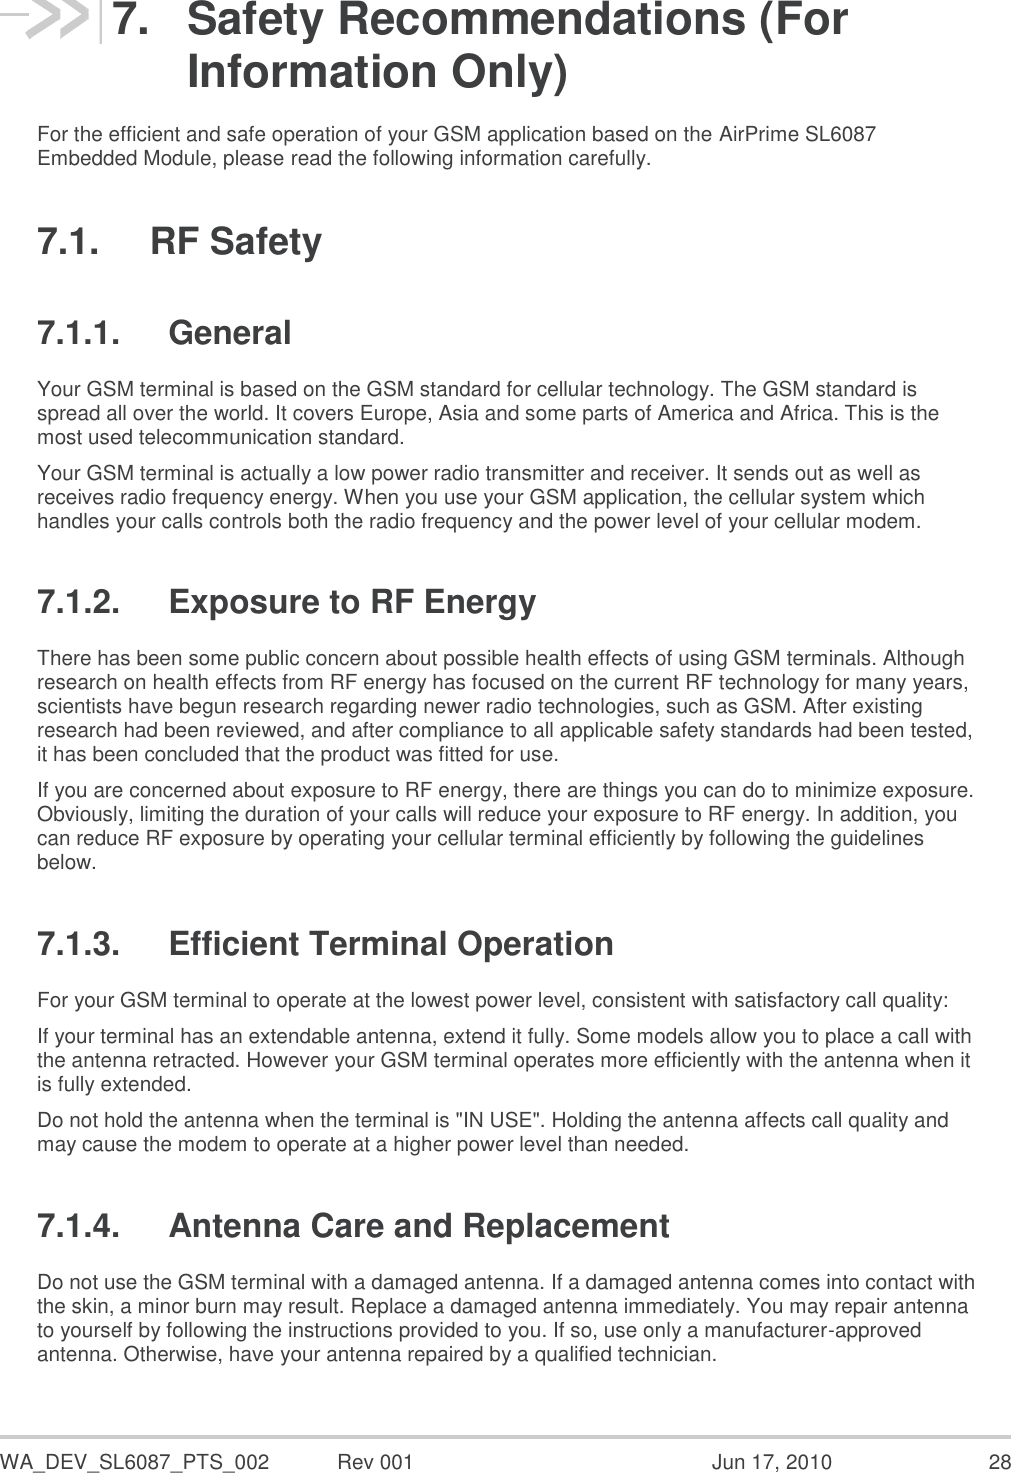  WA_DEV_SL6087_PTS_002  Rev 001  Jun 17, 2010  28 7.  Safety Recommendations (For Information Only) For the efficient and safe operation of your GSM application based on the AirPrime SL6087 Embedded Module, please read the following information carefully. 7.1.  RF Safety 7.1.1.  General Your GSM terminal is based on the GSM standard for cellular technology. The GSM standard is spread all over the world. It covers Europe, Asia and some parts of America and Africa. This is the most used telecommunication standard. Your GSM terminal is actually a low power radio transmitter and receiver. It sends out as well as receives radio frequency energy. When you use your GSM application, the cellular system which handles your calls controls both the radio frequency and the power level of your cellular modem. 7.1.2.  Exposure to RF Energy There has been some public concern about possible health effects of using GSM terminals. Although research on health effects from RF energy has focused on the current RF technology for many years, scientists have begun research regarding newer radio technologies, such as GSM. After existing research had been reviewed, and after compliance to all applicable safety standards had been tested, it has been concluded that the product was fitted for use. If you are concerned about exposure to RF energy, there are things you can do to minimize exposure. Obviously, limiting the duration of your calls will reduce your exposure to RF energy. In addition, you can reduce RF exposure by operating your cellular terminal efficiently by following the guidelines below. 7.1.3.  Efficient Terminal Operation For your GSM terminal to operate at the lowest power level, consistent with satisfactory call quality: If your terminal has an extendable antenna, extend it fully. Some models allow you to place a call with the antenna retracted. However your GSM terminal operates more efficiently with the antenna when it is fully extended. Do not hold the antenna when the terminal is &quot;IN USE&quot;. Holding the antenna affects call quality and may cause the modem to operate at a higher power level than needed. 7.1.4.  Antenna Care and Replacement Do not use the GSM terminal with a damaged antenna. If a damaged antenna comes into contact with the skin, a minor burn may result. Replace a damaged antenna immediately. You may repair antenna to yourself by following the instructions provided to you. If so, use only a manufacturer-approved antenna. Otherwise, have your antenna repaired by a qualified technician. 